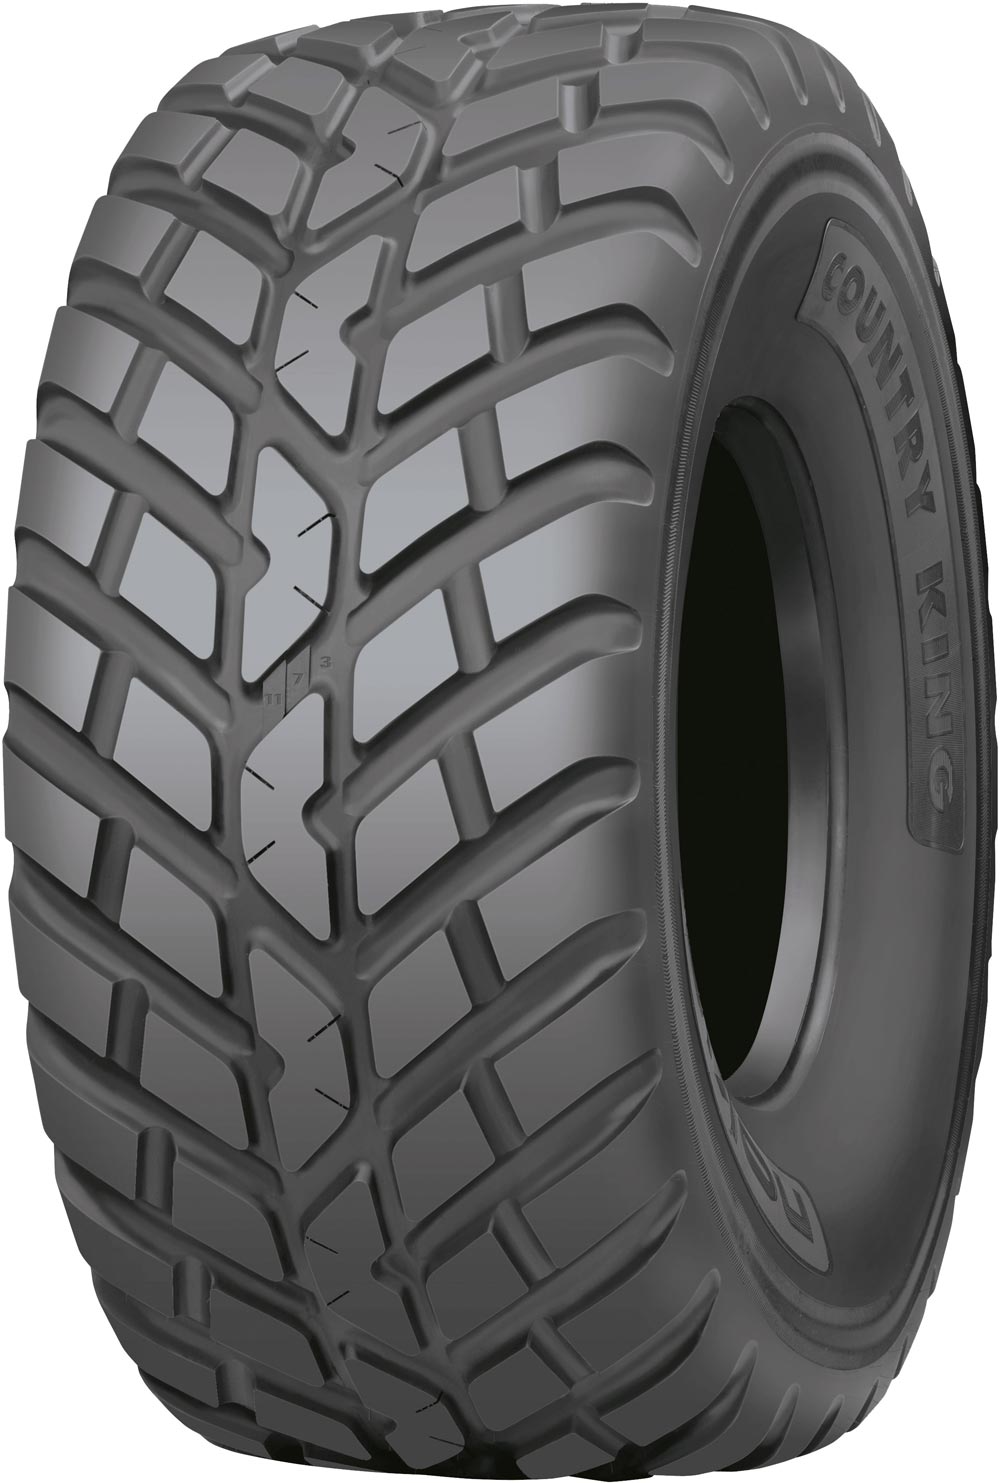 Индустриални гуми NOKIAN COUNTRY KING TL 500/60 R22.5 155D